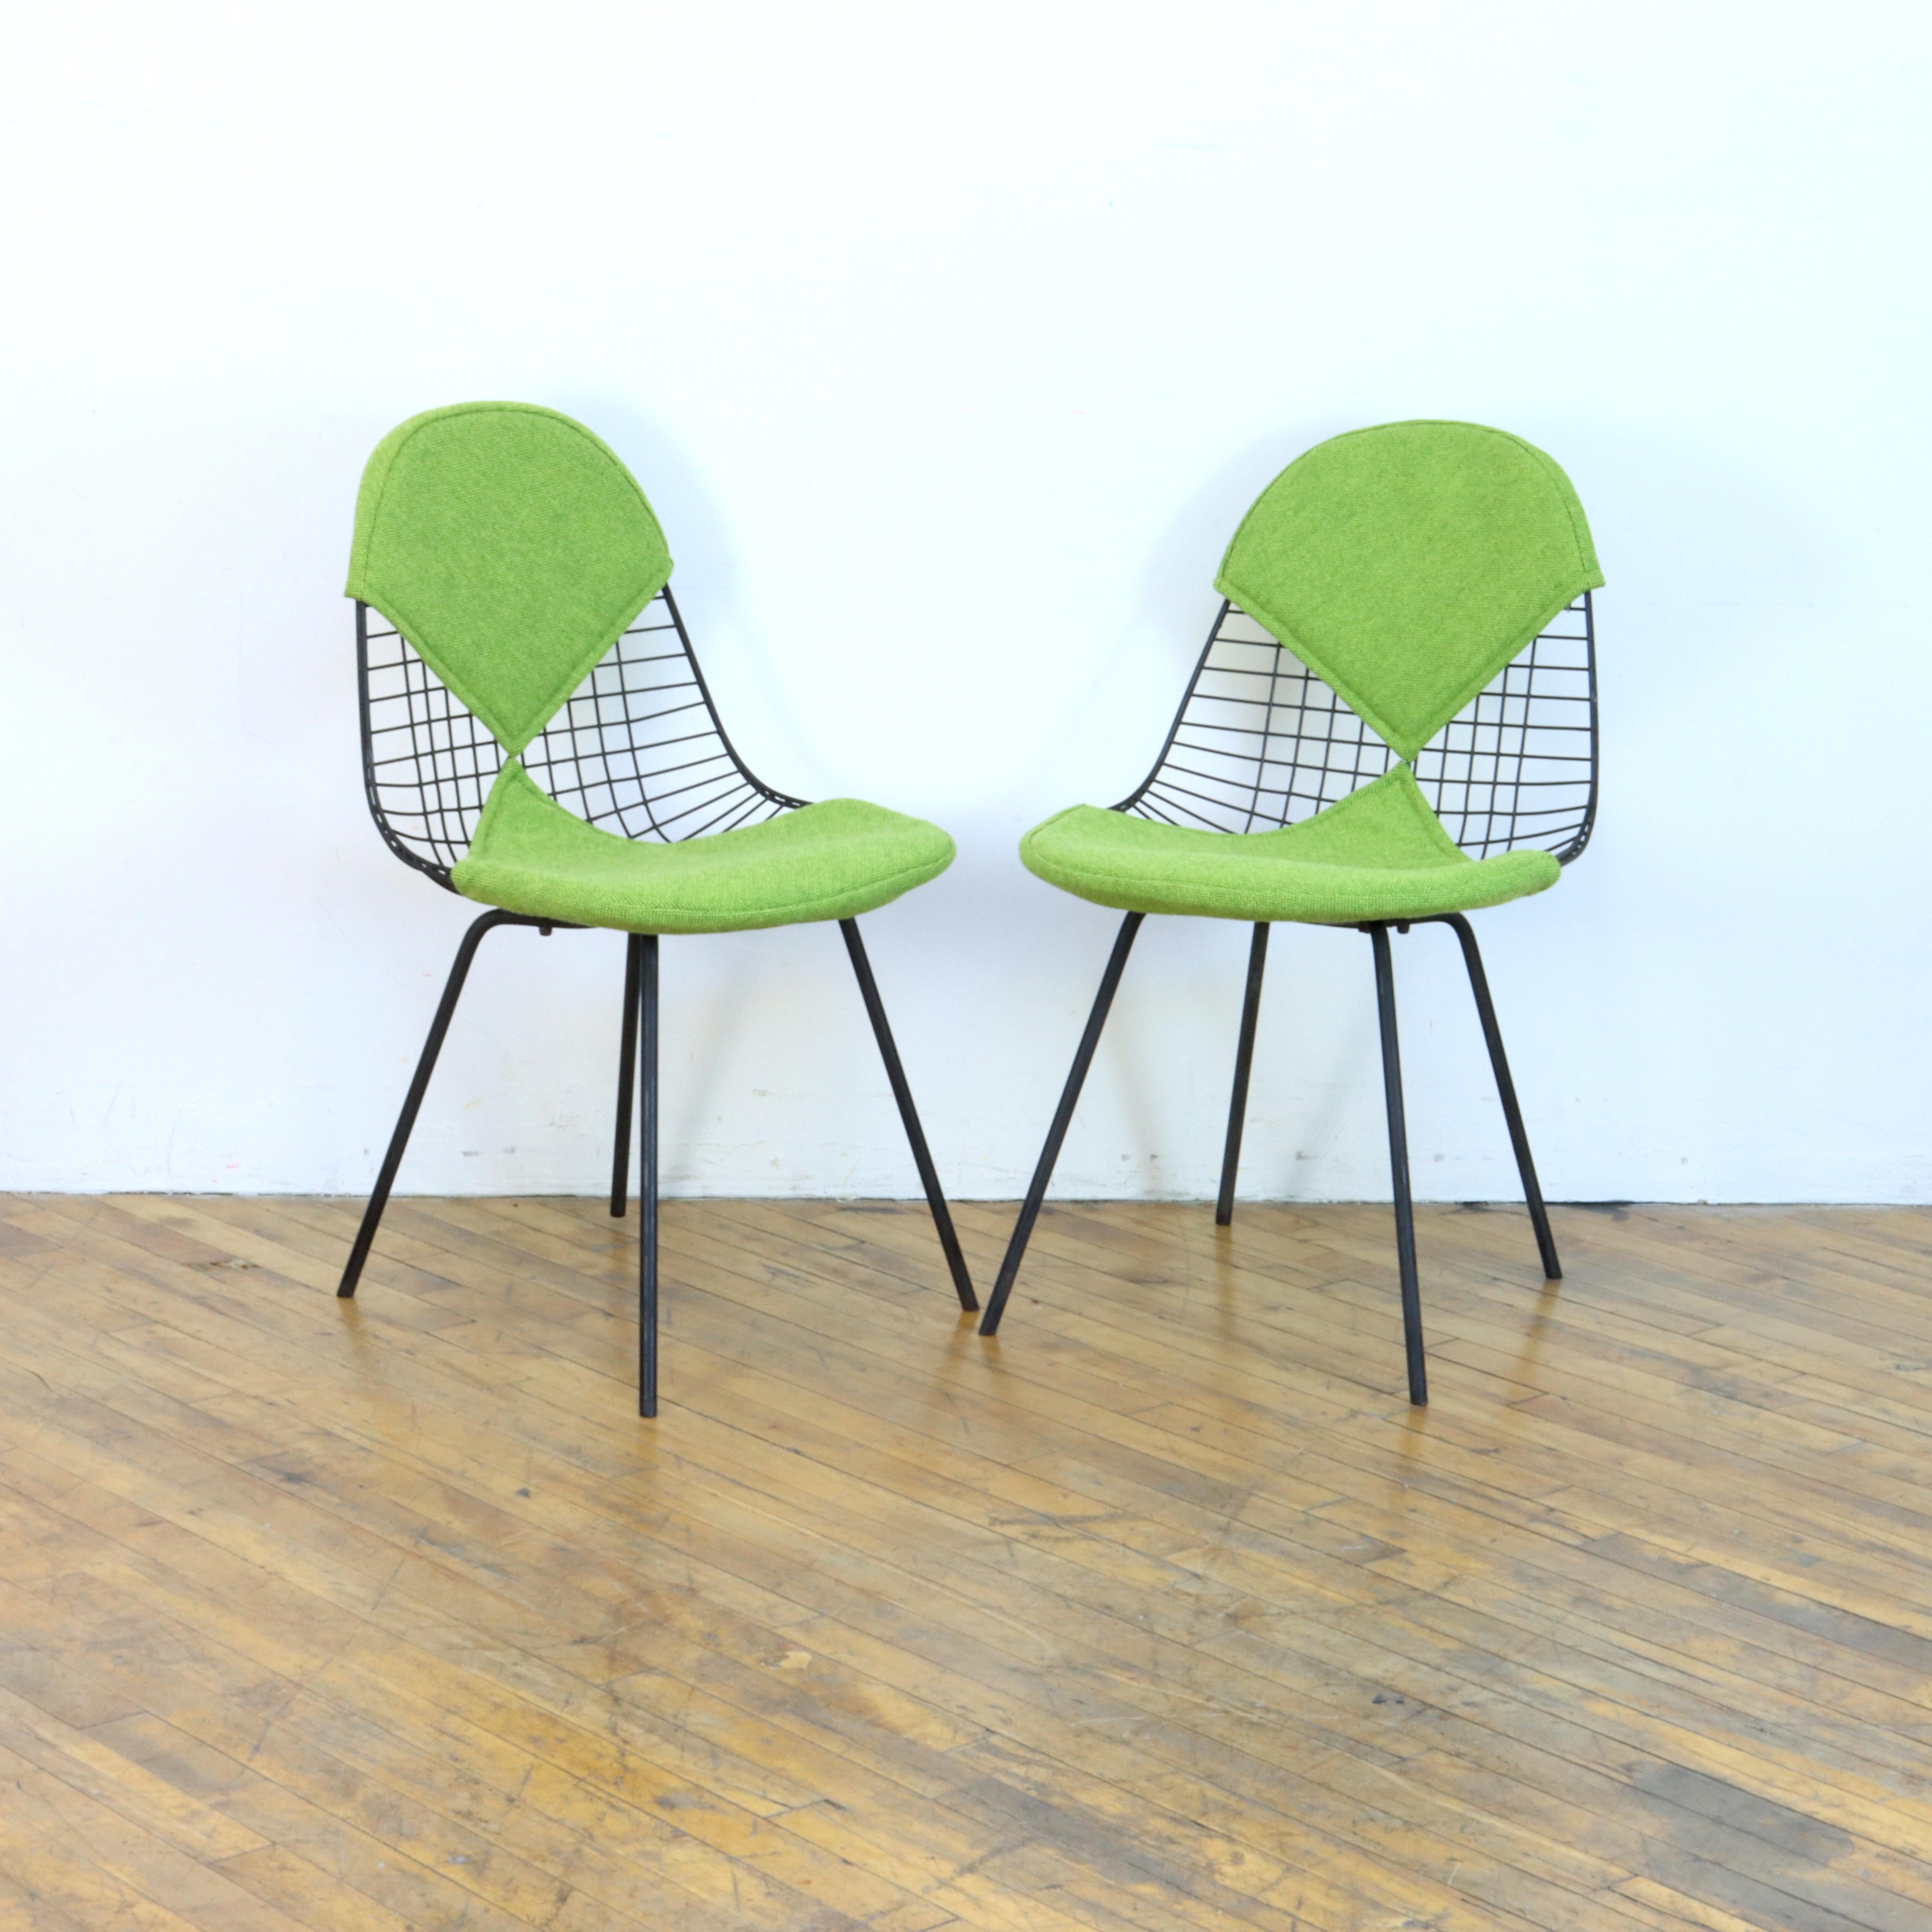 Early pair of DKX chairs by Charles and Ray Eames, produced by Herman Miller featuring the discontinued 